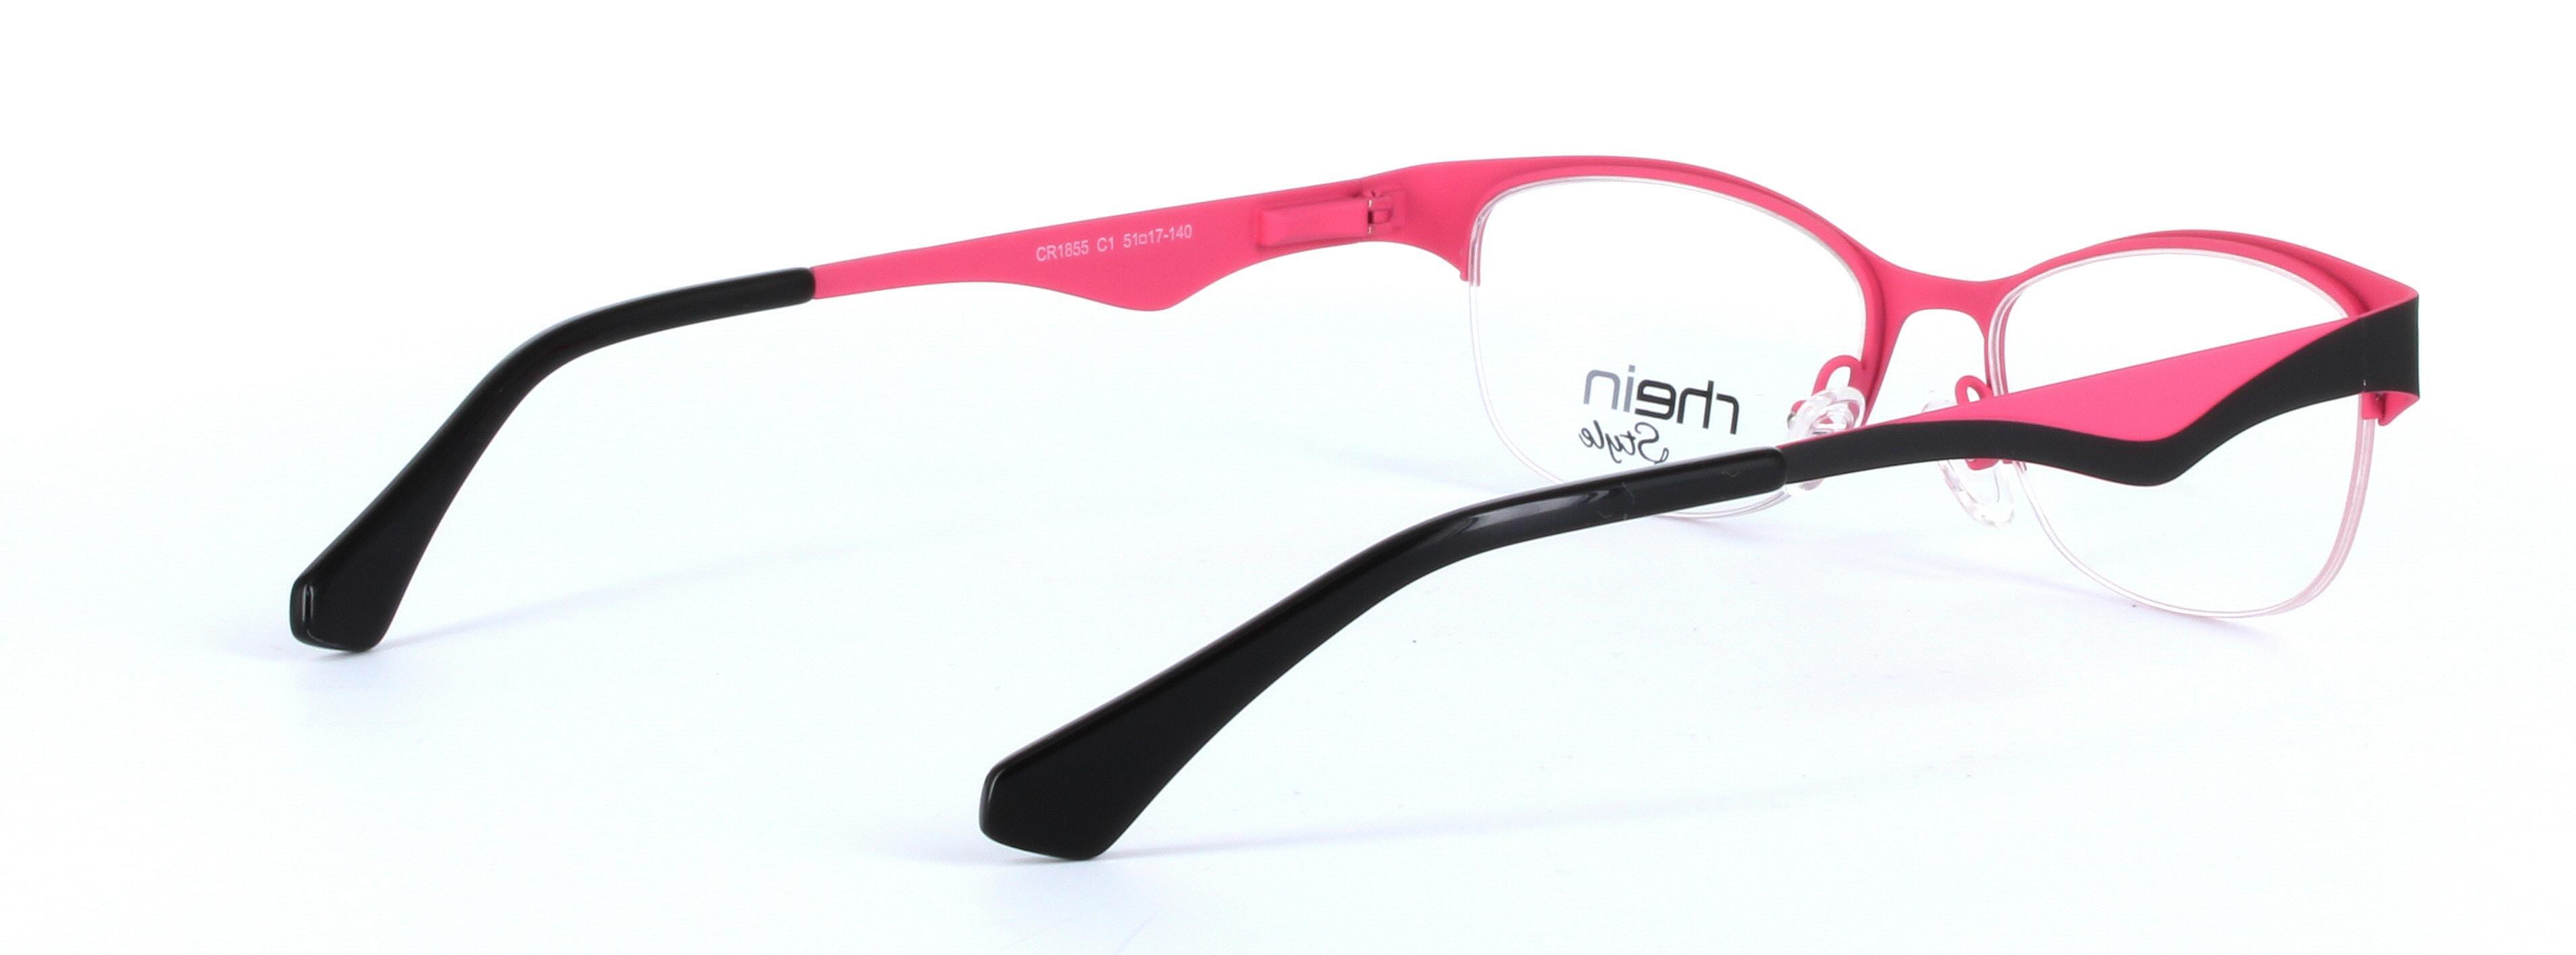 Kelly Black and Pink Semi Rimless Oval Rectangular Metal Glasses - Image View 4